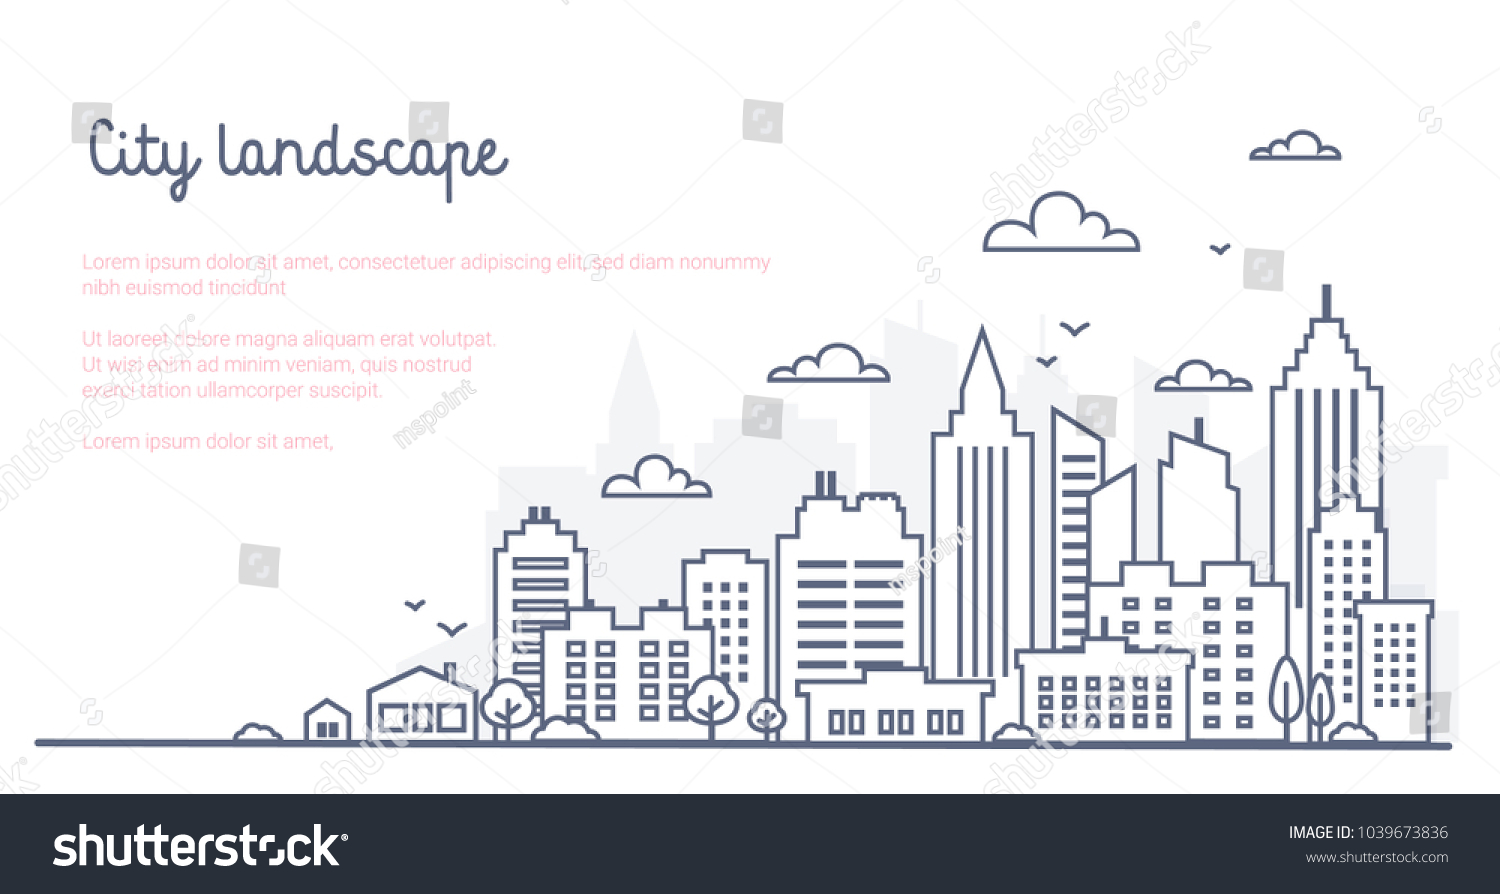 City landscape template. Thin line City landscape. Downtown landscape with high skyscrapers. Panorama architecture Goverment buildings Isolated outline illustration. Urban life Vector illustration #1039673836